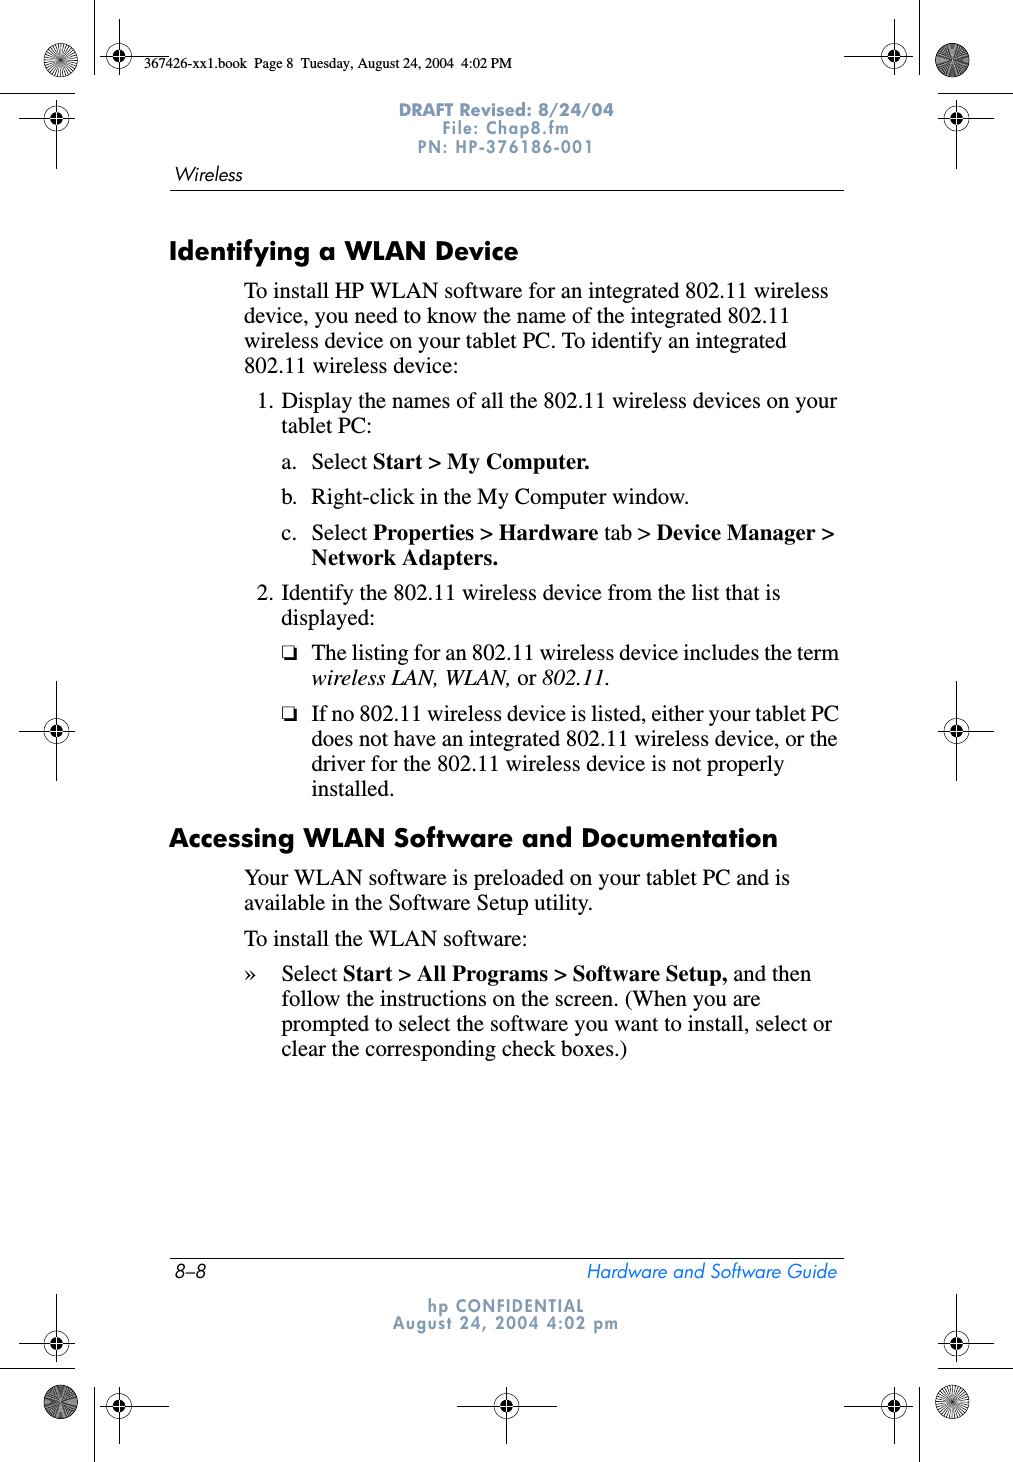 8–8 Hardware and Software GuideWirelessDRAFT Revised: 8/24/04File: Chap8.fm PN: HP-376186-001 hp CONFIDENTIALAugust 24, 2004 4:02 pmIdentifying a WLAN DeviceTo install HP WLAN software for an integrated 802.11 wireless device, you need to know the name of the integrated 802.11 wireless device on your tablet PC. To identify an integrated 802.11 wireless device:1. Display the names of all the 802.11 wireless devices on your tablet PC: a. Select Start &gt; My Computer.b. Right-click in the My Computer window.c. Select Properties &gt; Hardware tab &gt; Device Manager &gt; Network Adapters.2. Identify the 802.11 wireless device from the list that is displayed:❏The listing for an 802.11 wireless device includes the term wireless LAN, WLAN, or 802.11.❏If no 802.11 wireless device is listed, either your tablet PC does not have an integrated 802.11 wireless device, or the driver for the 802.11 wireless device is not properly installed.Accessing WLAN Software and DocumentationYour WLAN software is preloaded on your tablet PC and is available in the Software Setup utility. To install the WLAN software:»Select Start &gt; All Programs &gt; Software Setup, and then follow the instructions on the screen. (When you are prompted to select the software you want to install, select or clear the corresponding check boxes.)367426-xx1.book  Page 8  Tuesday, August 24, 2004  4:02 PM